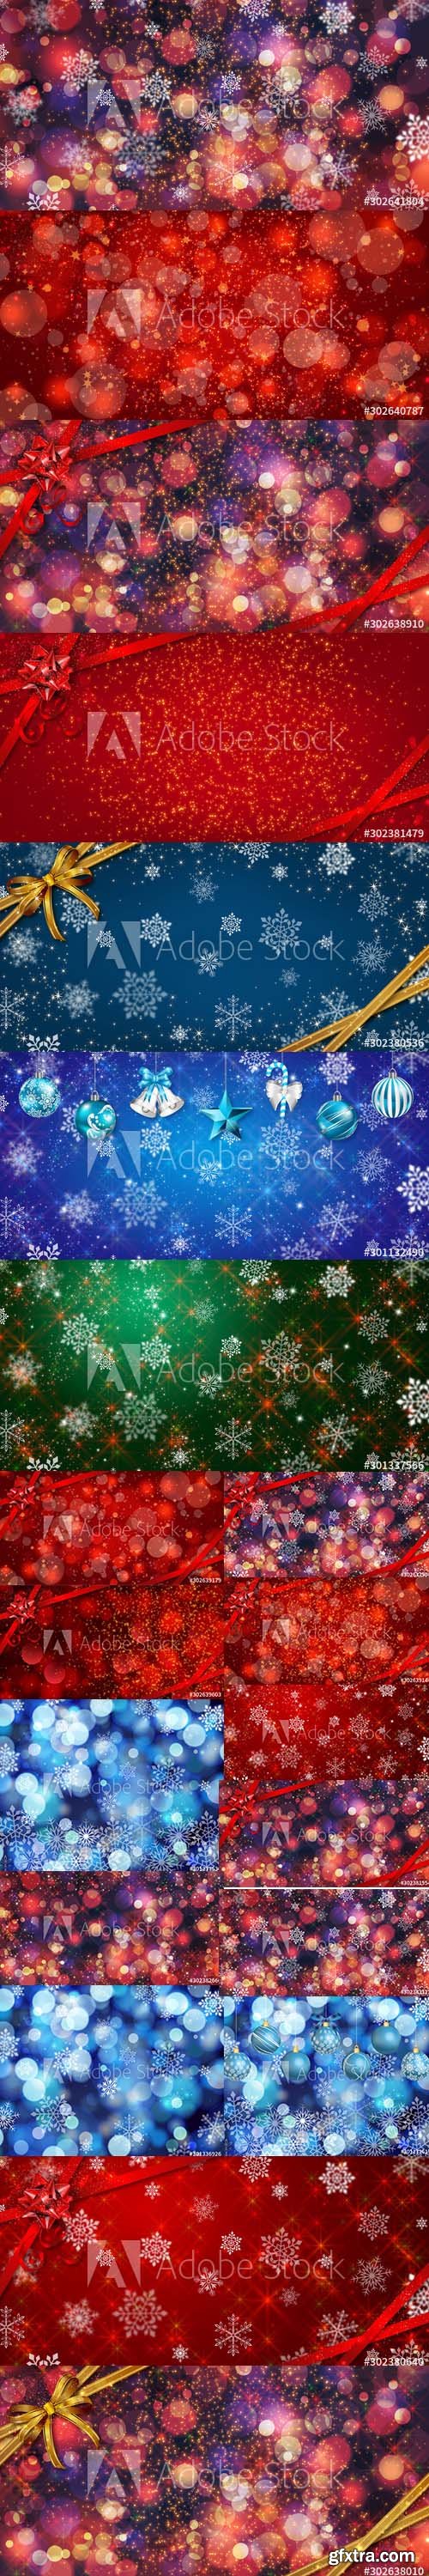 Magic Christmas Backgrounds Pack Vol 2